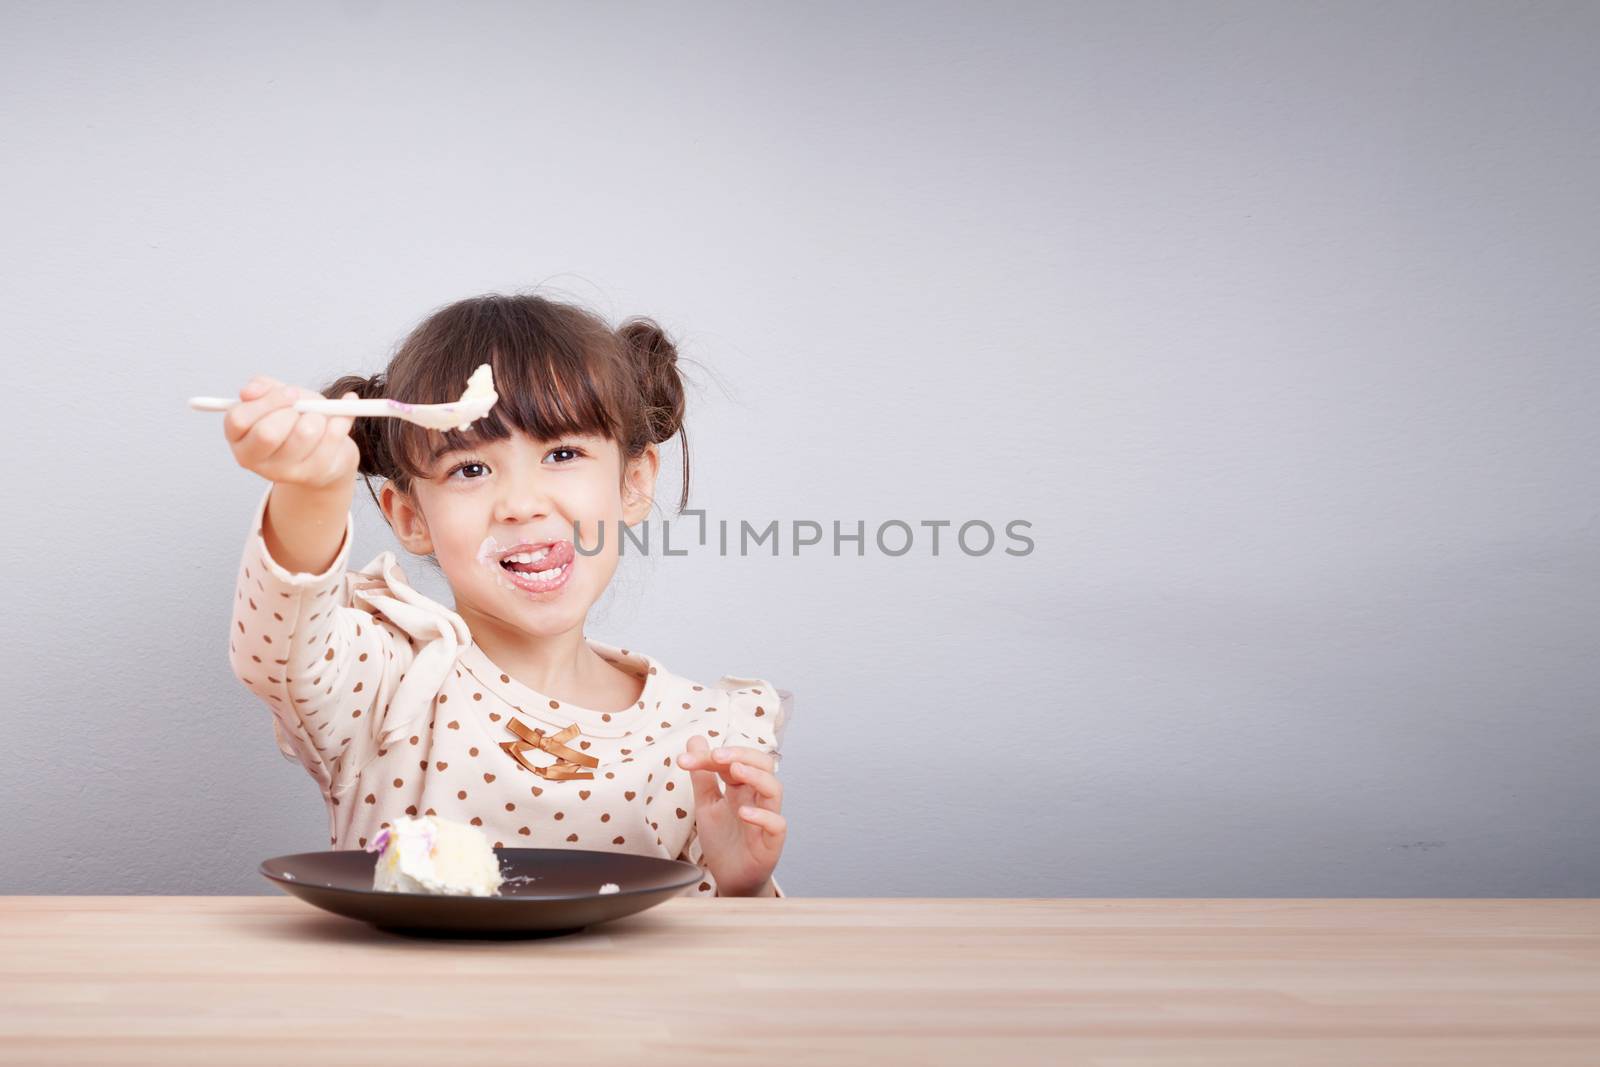 Kids enjoy eating concept : Happy little cute mixed race girl enjoy eating cake with smiley face , tongue stick with spoon in her hand for invite to eat. Kid poster background. by asiandelight